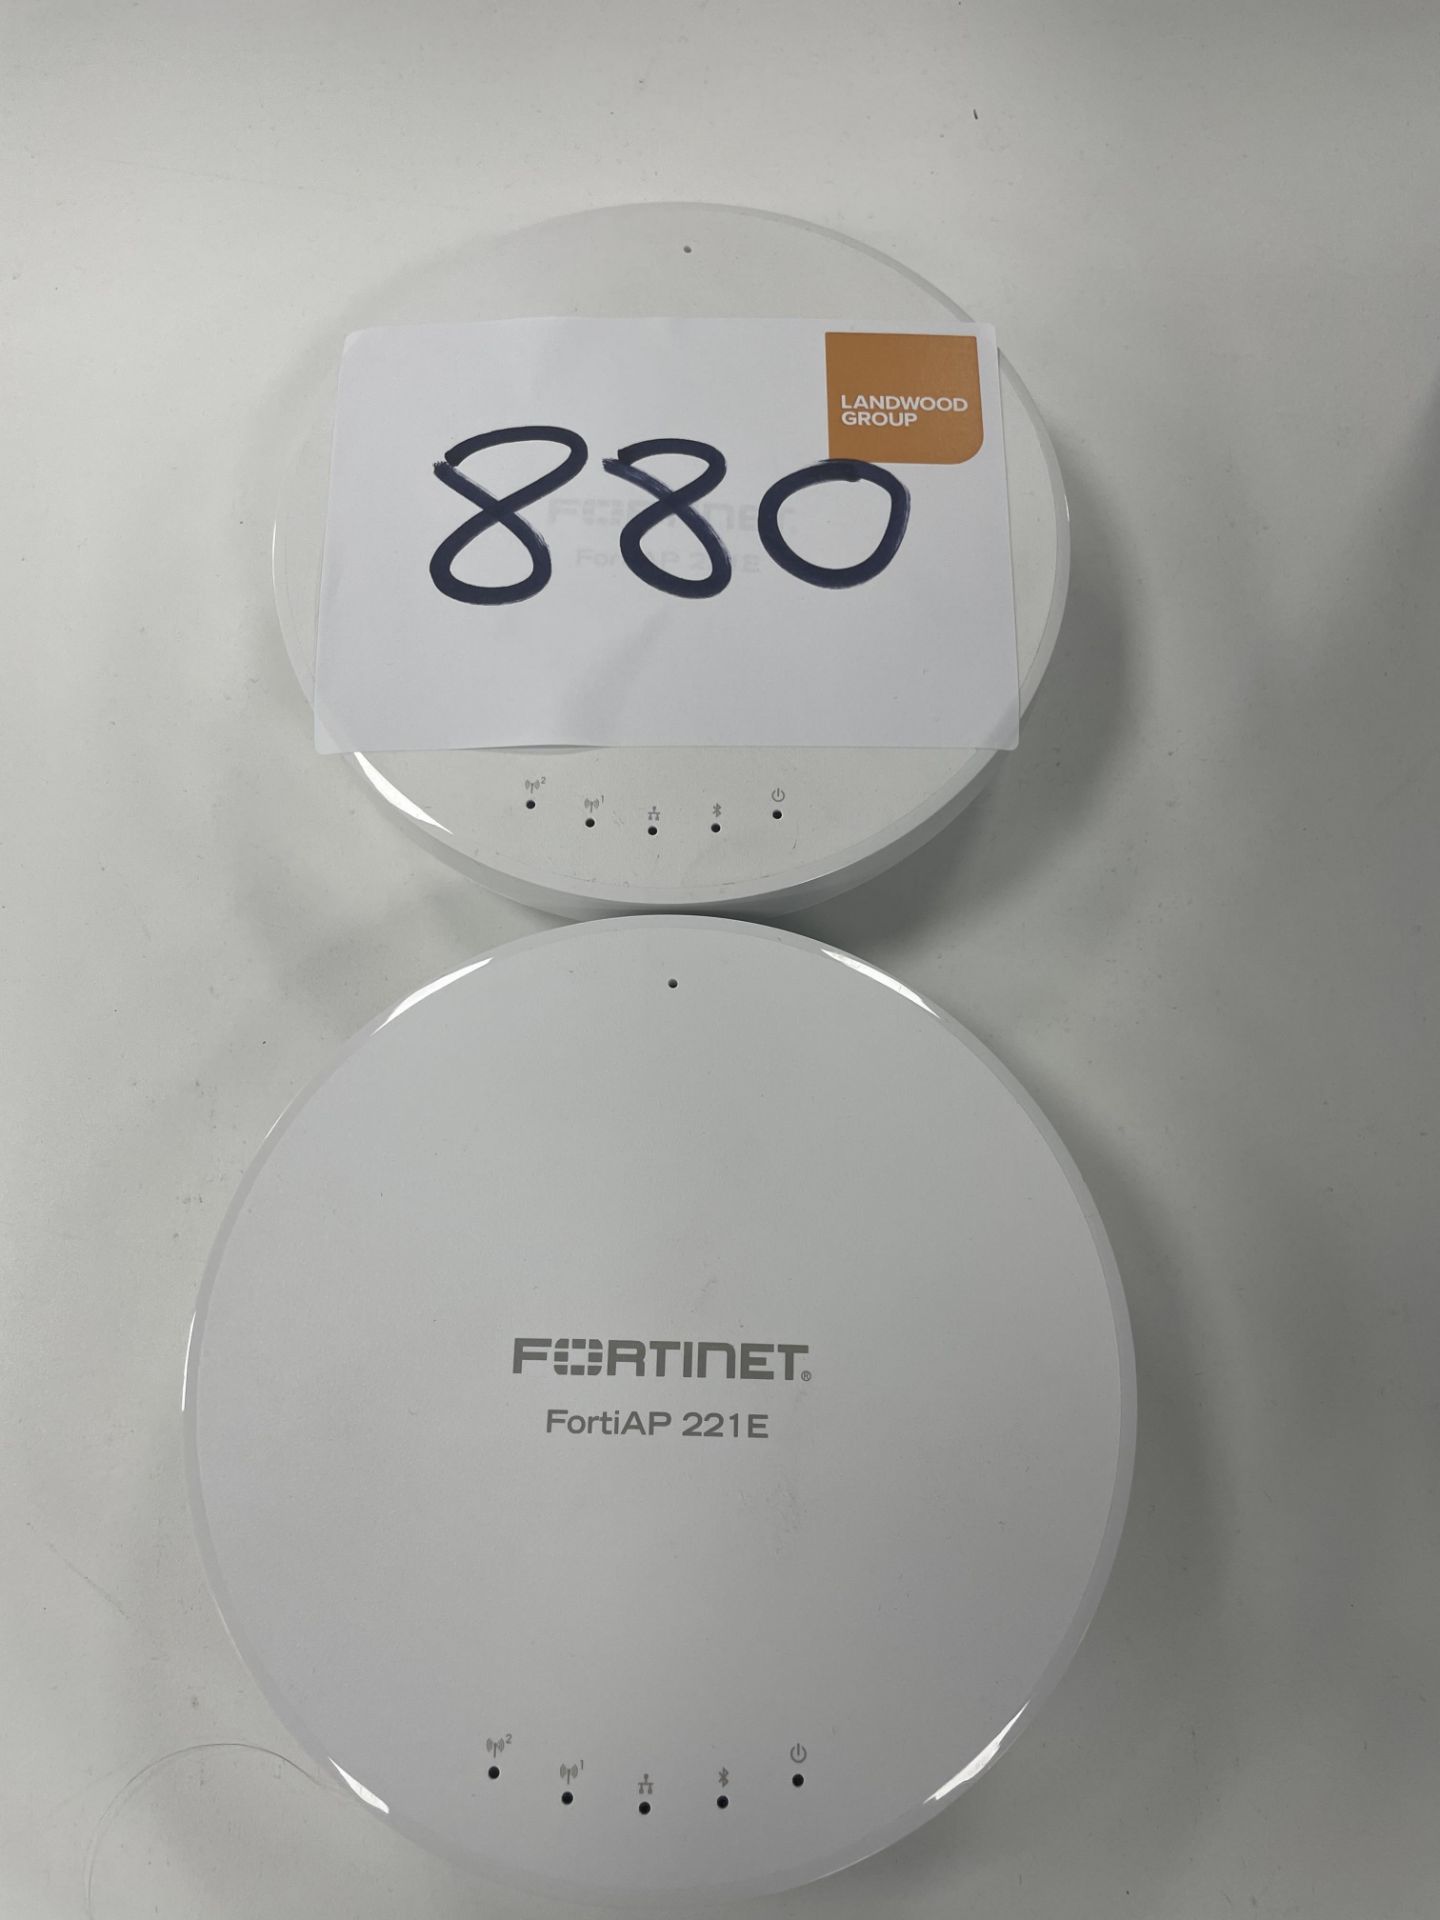 2 Fortinet FortiAP 221E indoor wireless dual band access points.